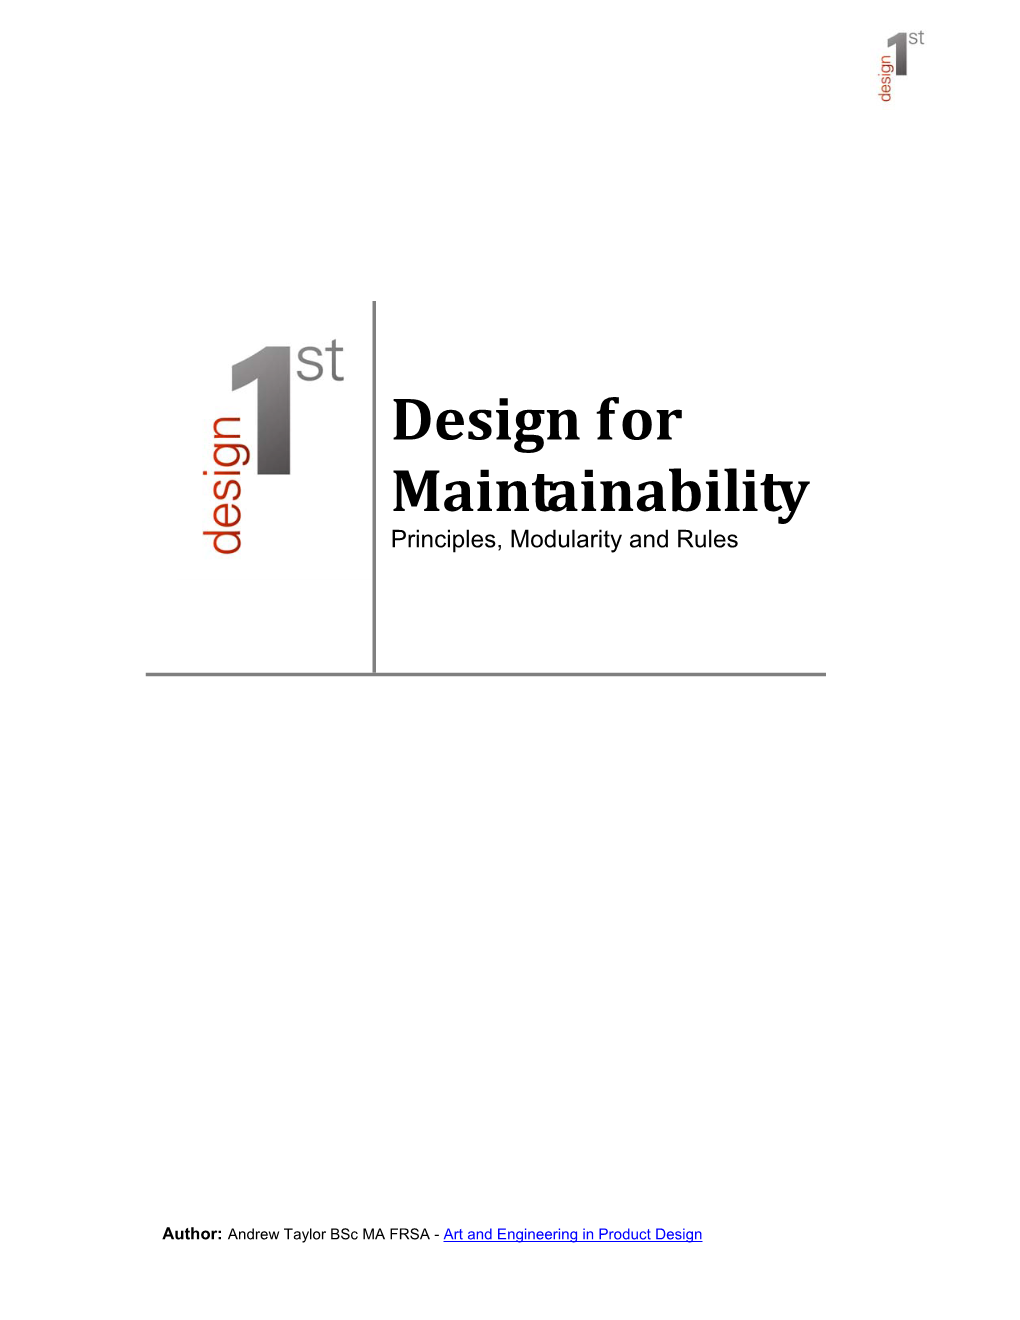 Design for Maintainability Principles, Modularity and Rules